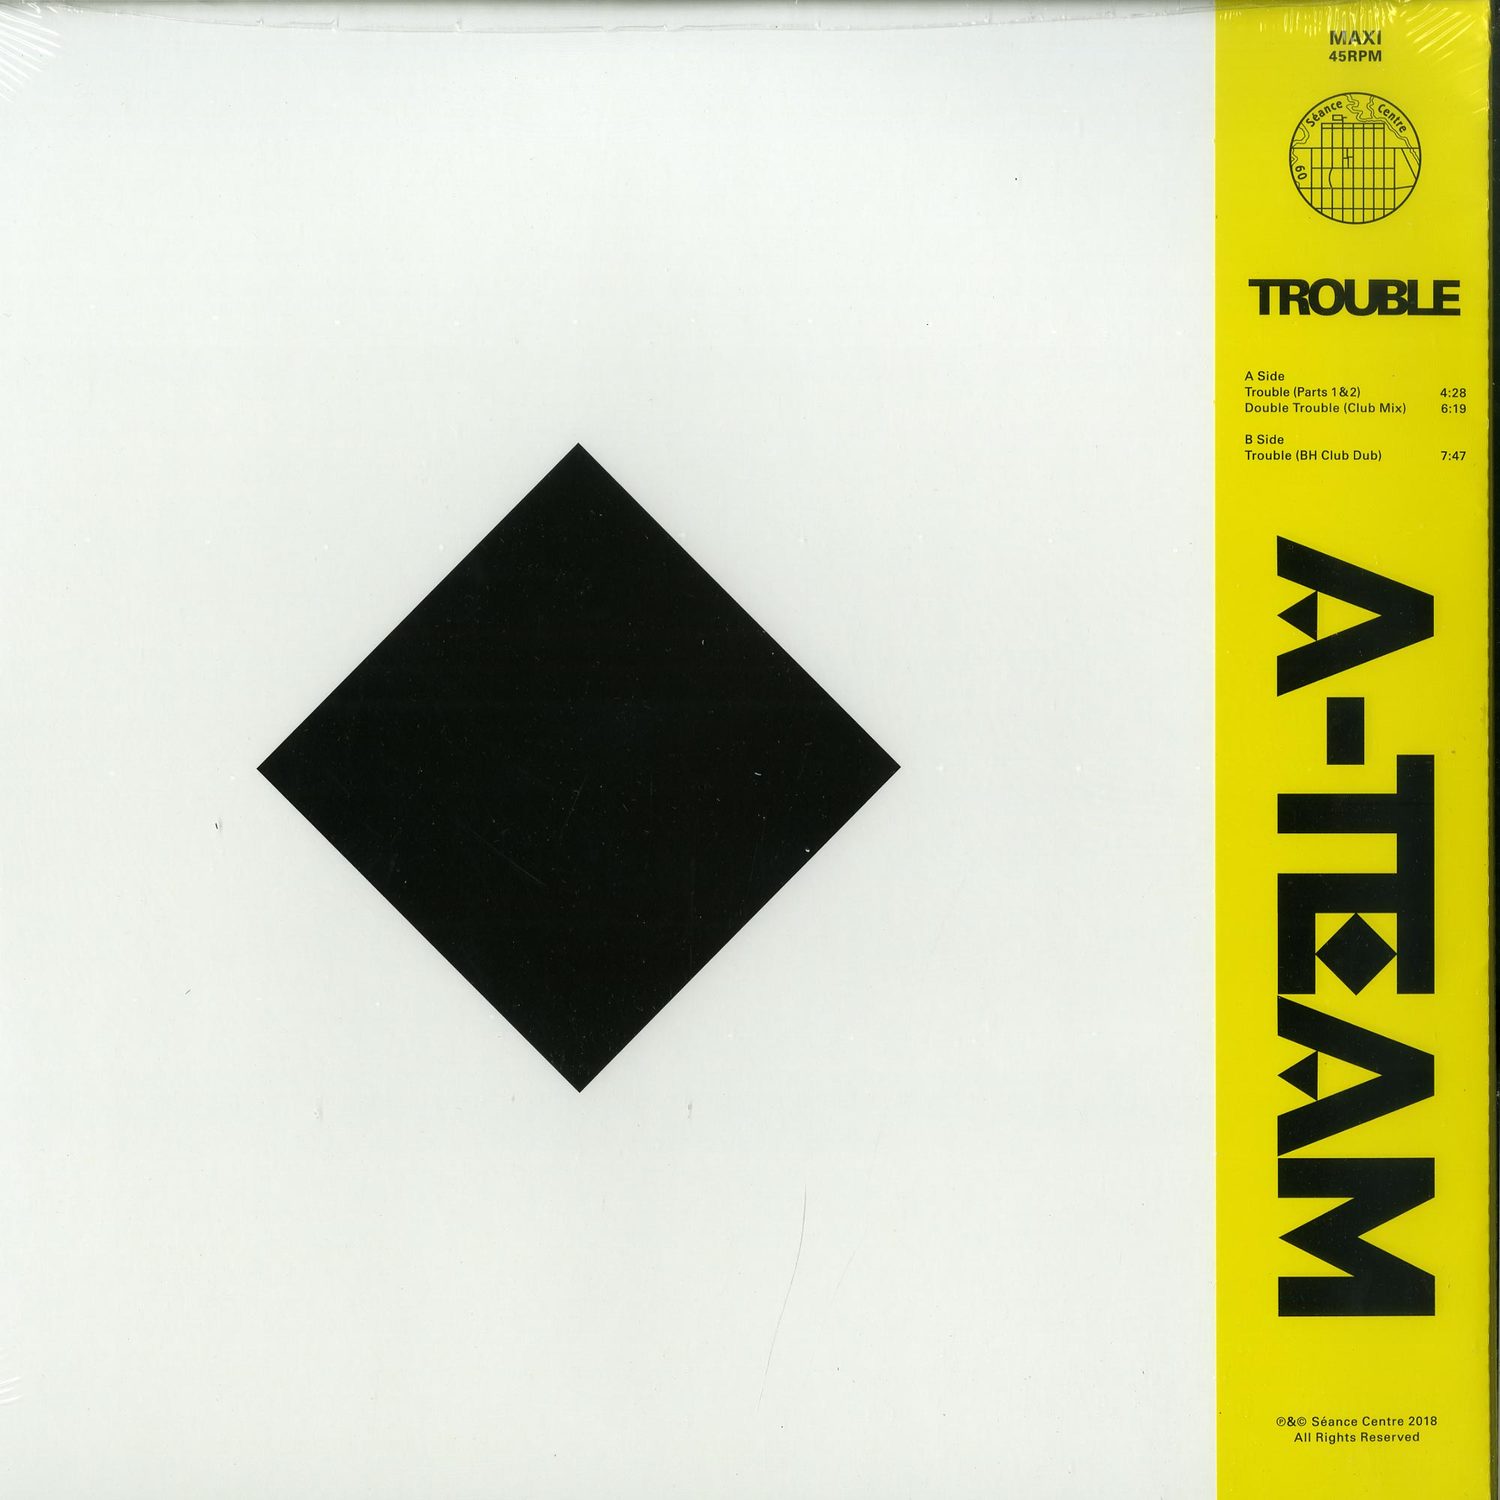 A-Team - TROUBLE